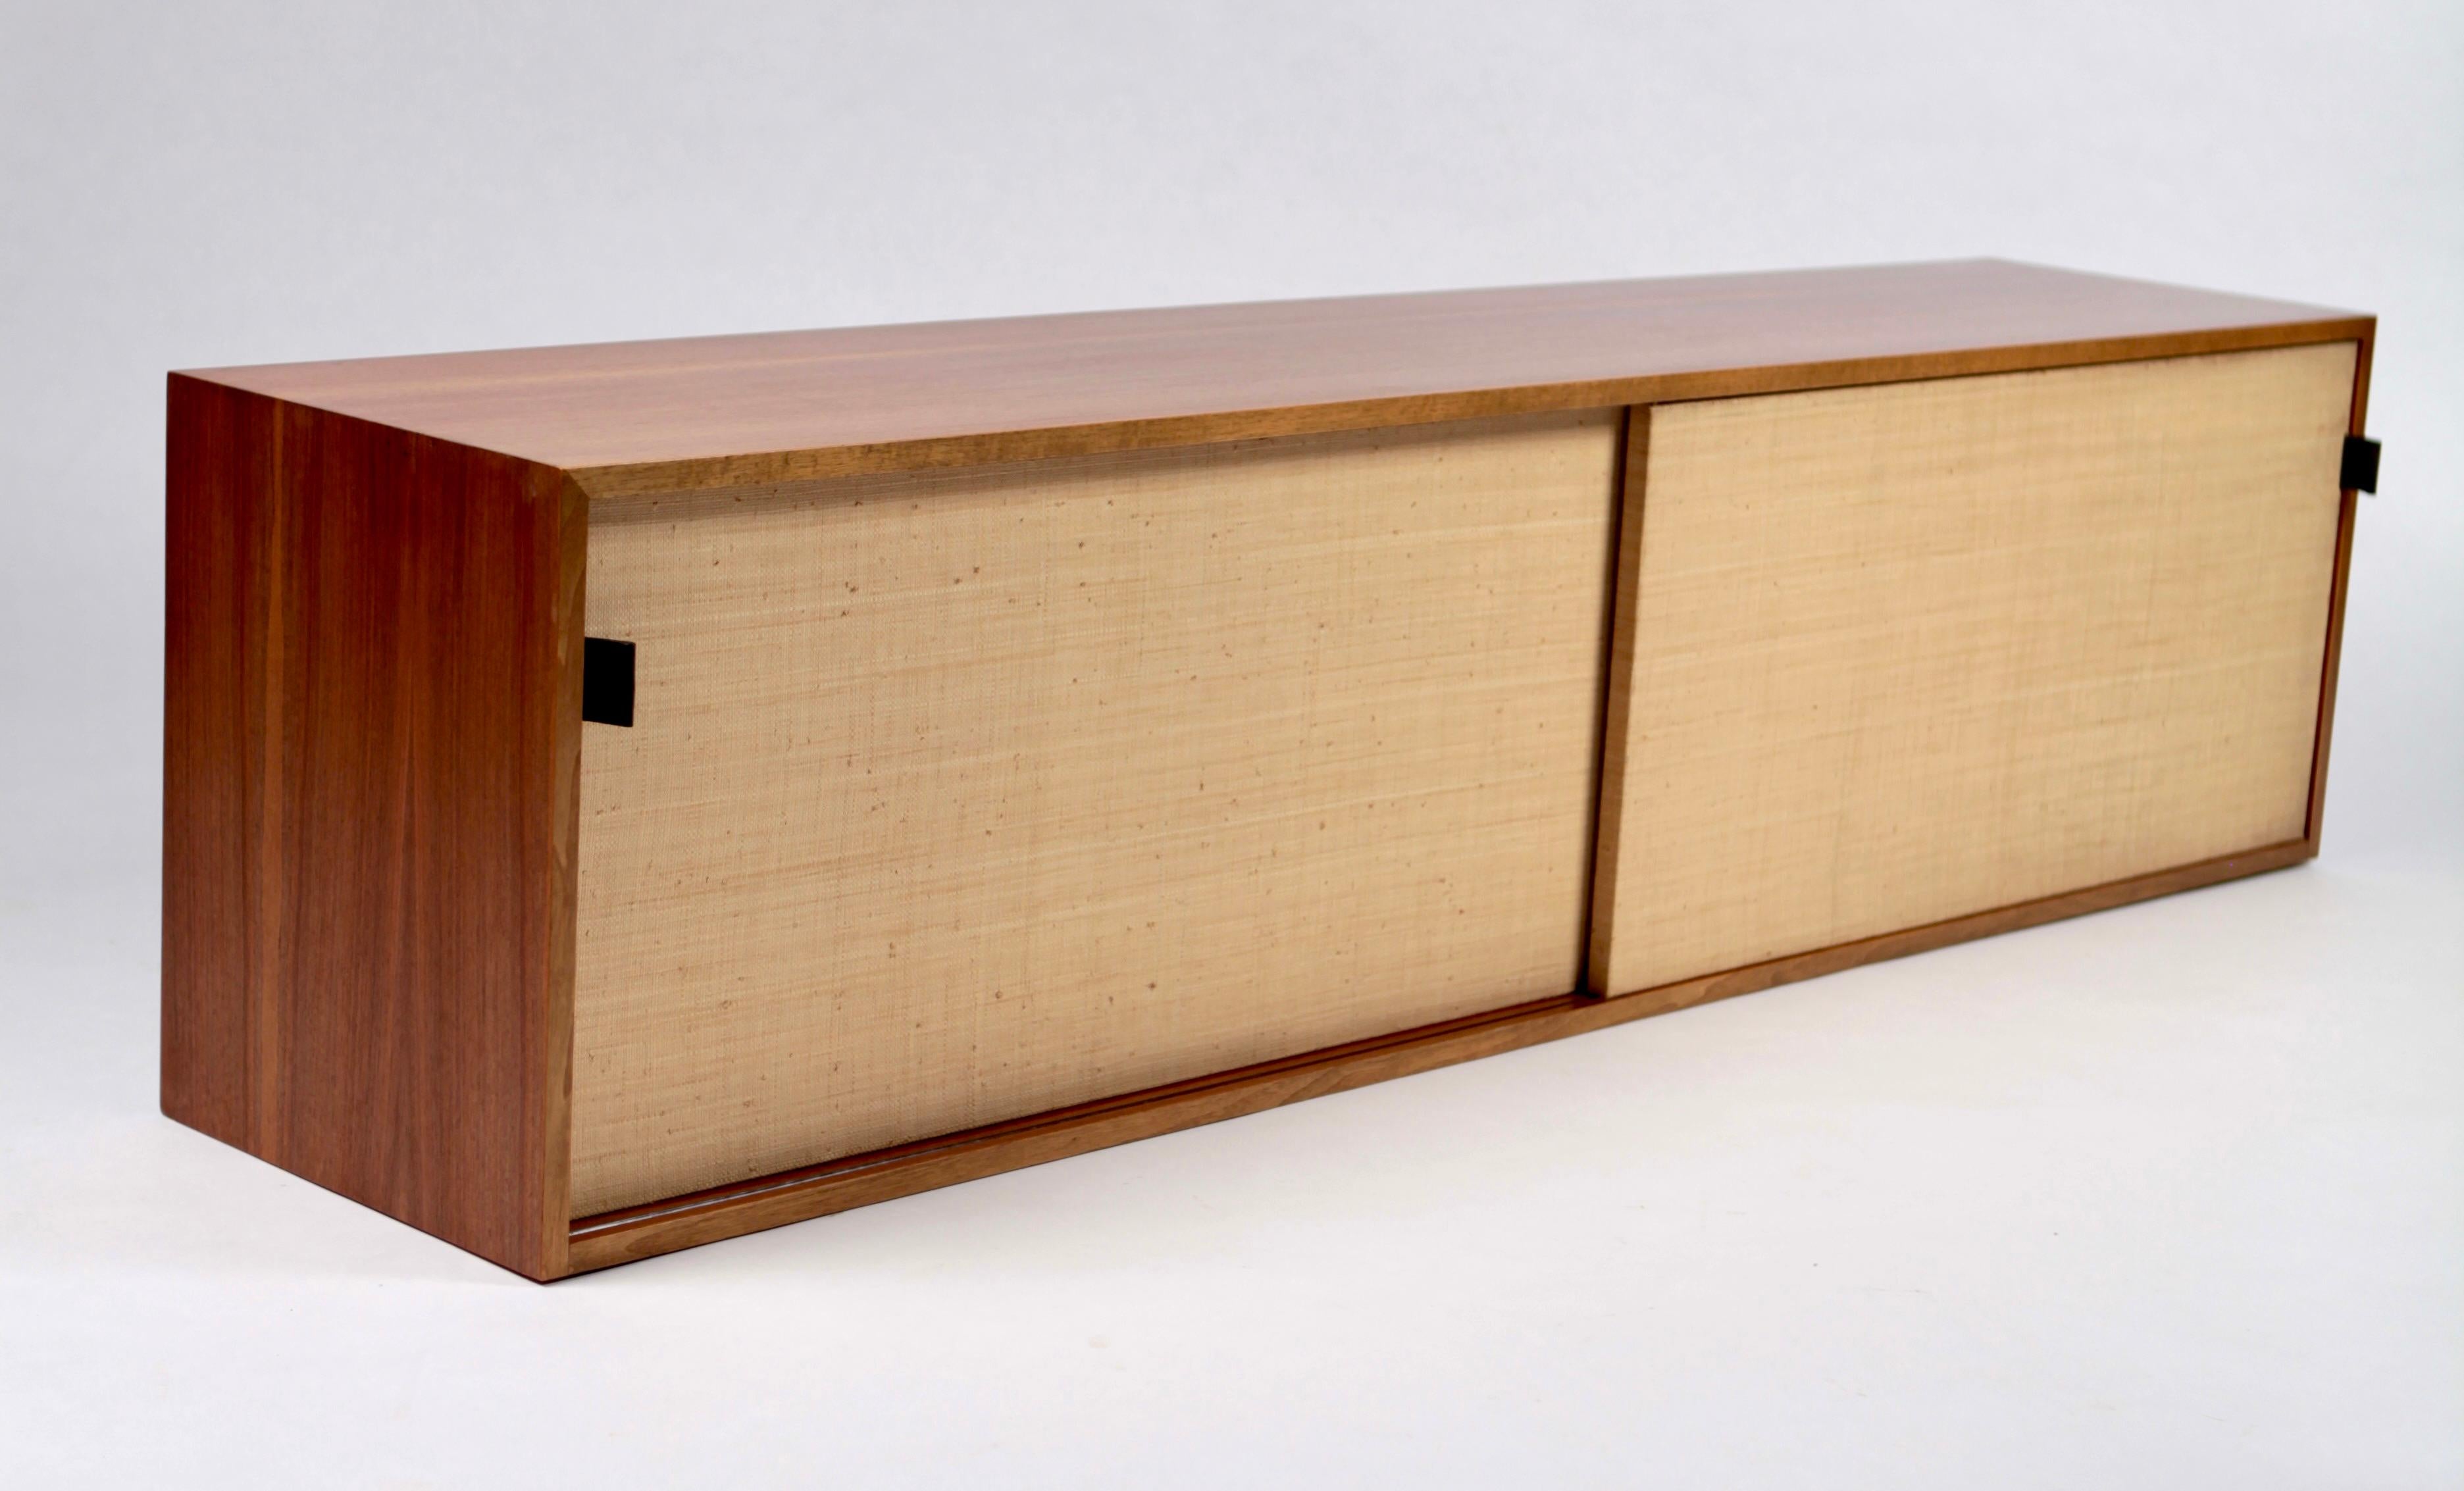 Leather Sideboard in Teak & Seagrass by Florence Knoll, Designed 1947